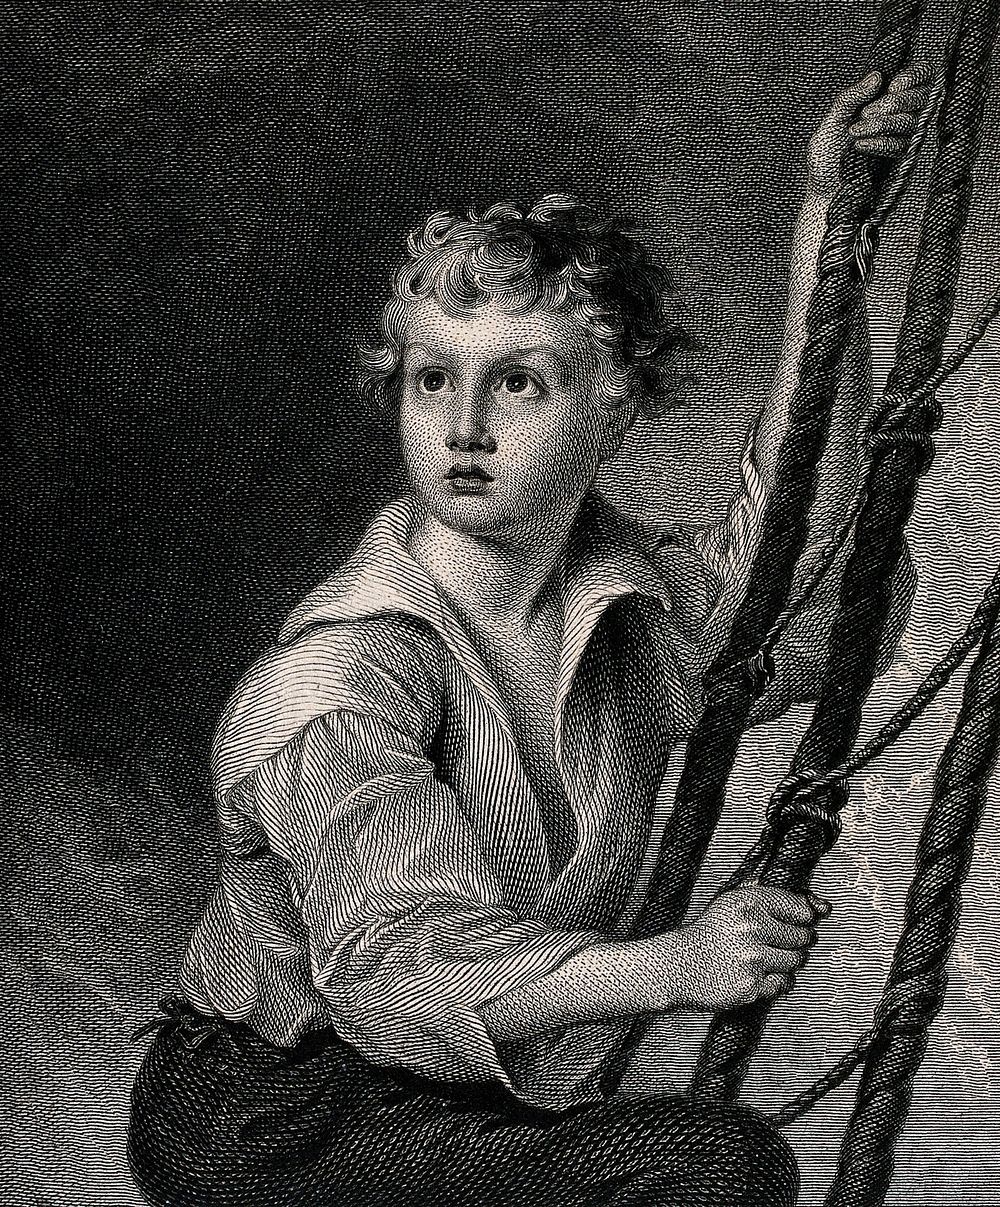 A boy sailor climbing up riggings. Engraving by W.H. Lizars after W. Nicholson.